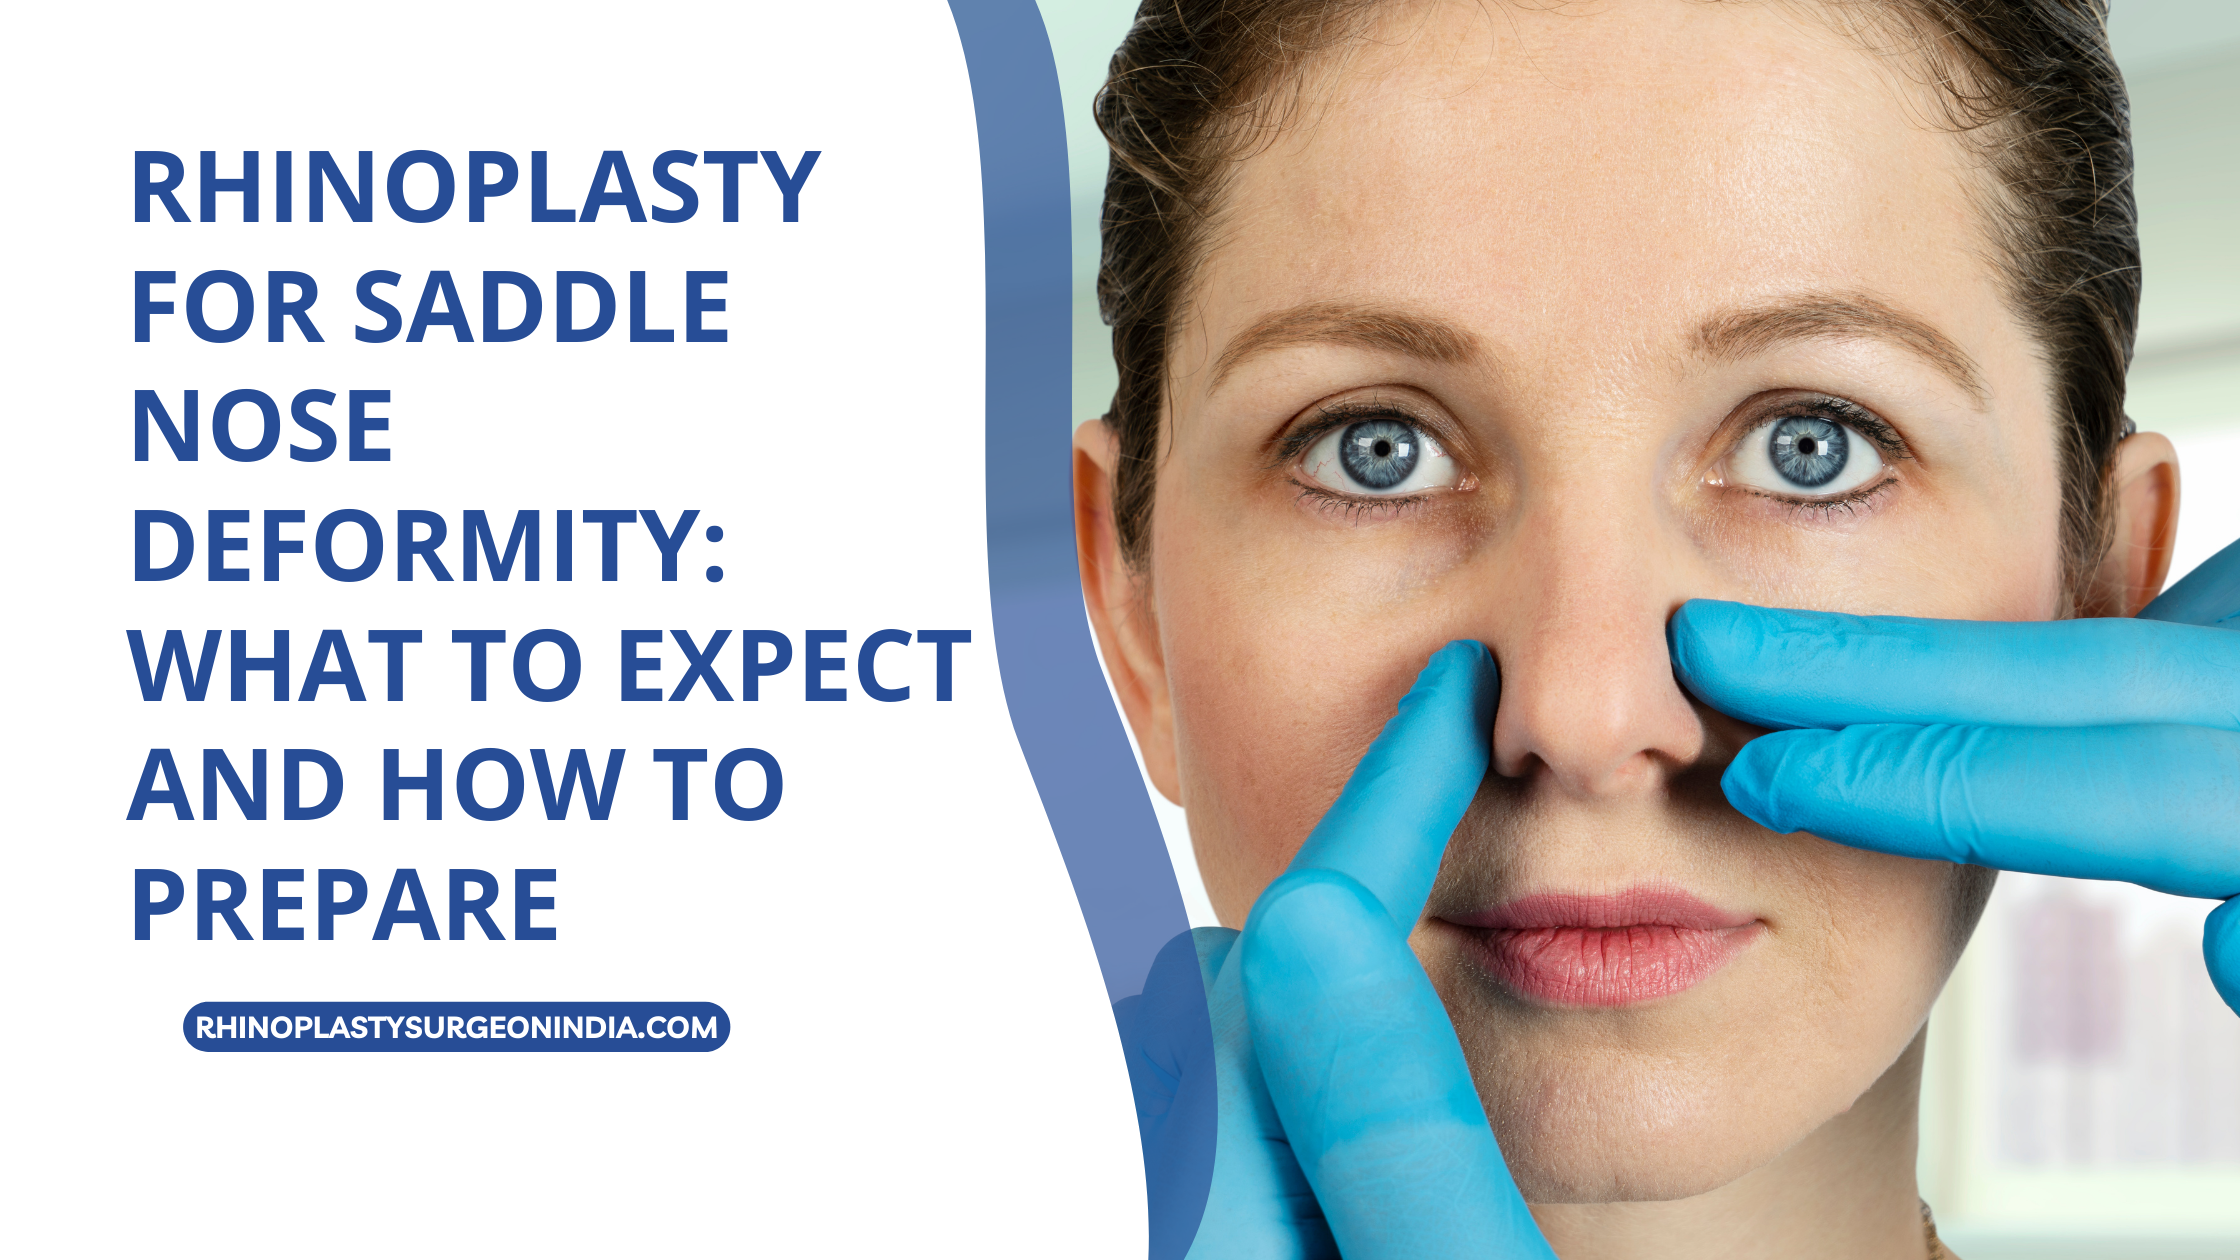 Rhinoplasty for Saddle Nose Deformity: What to Expect and How to Prepare